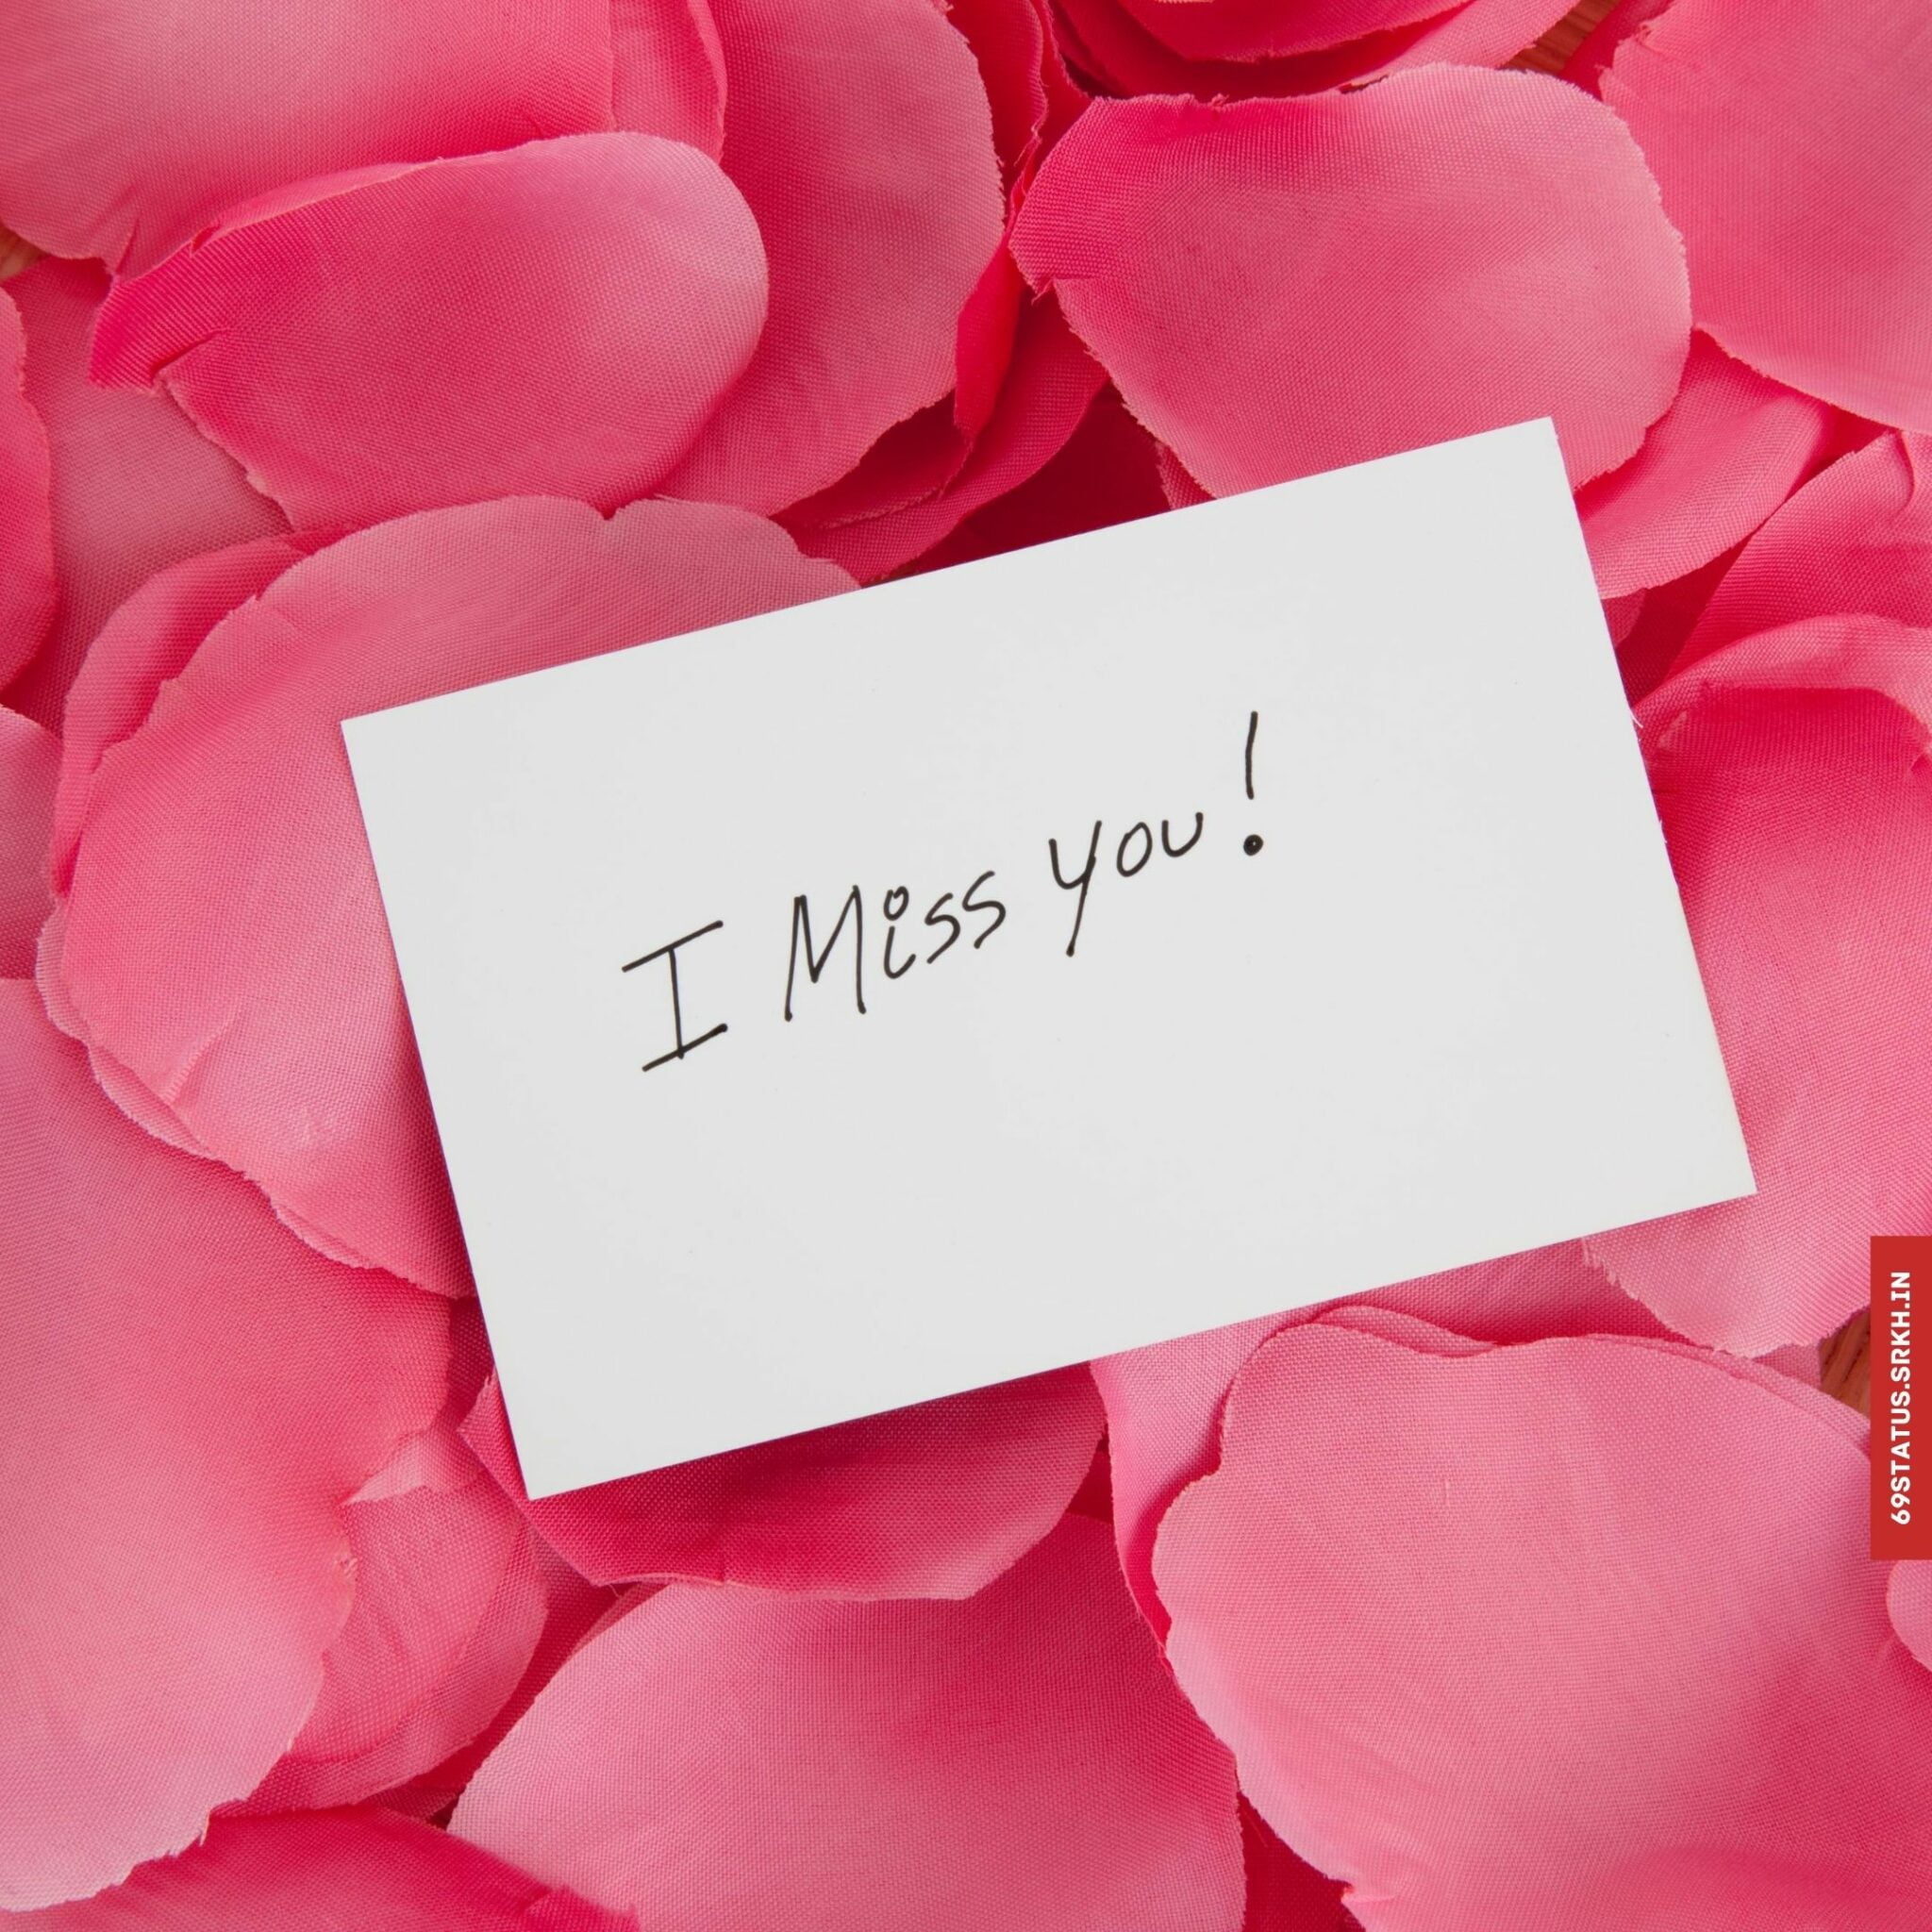 Miss you images hd